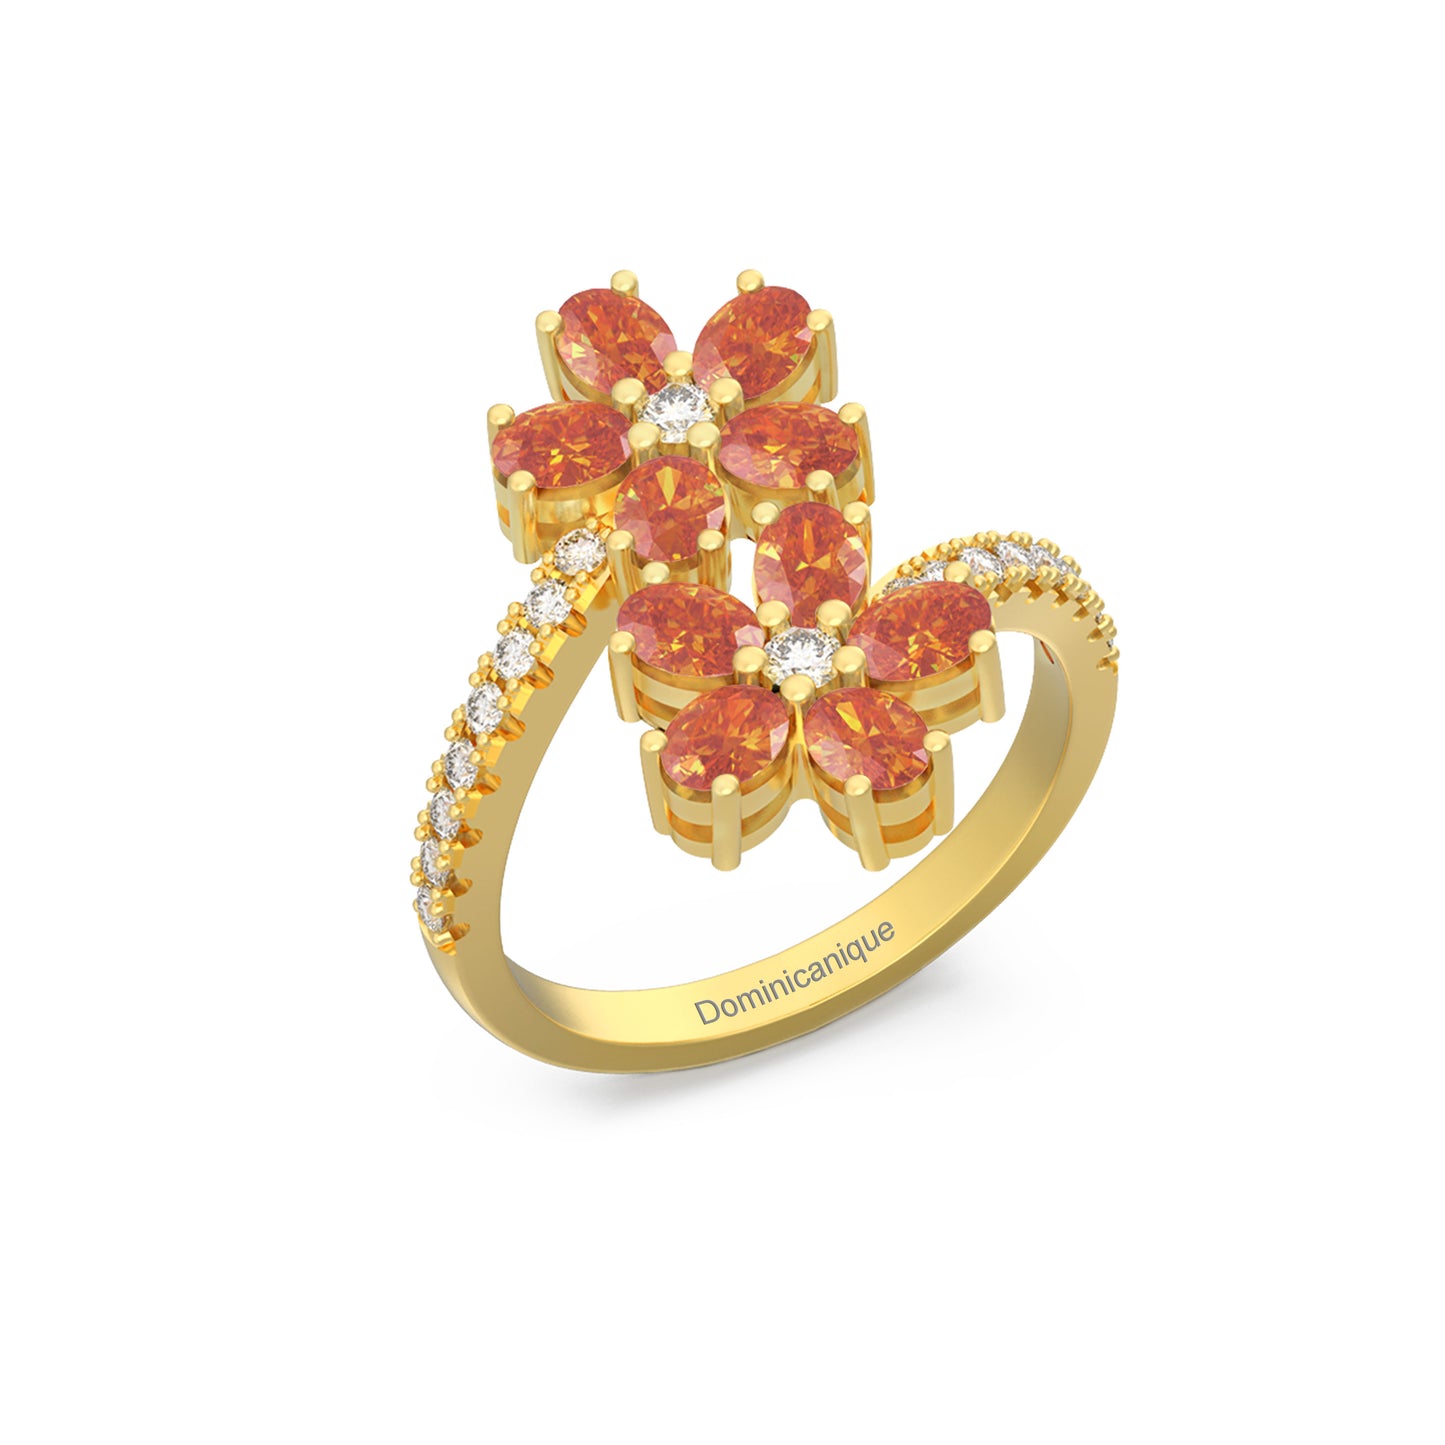 "Twin Flowers" Ring with 2.25ct Dominicanique